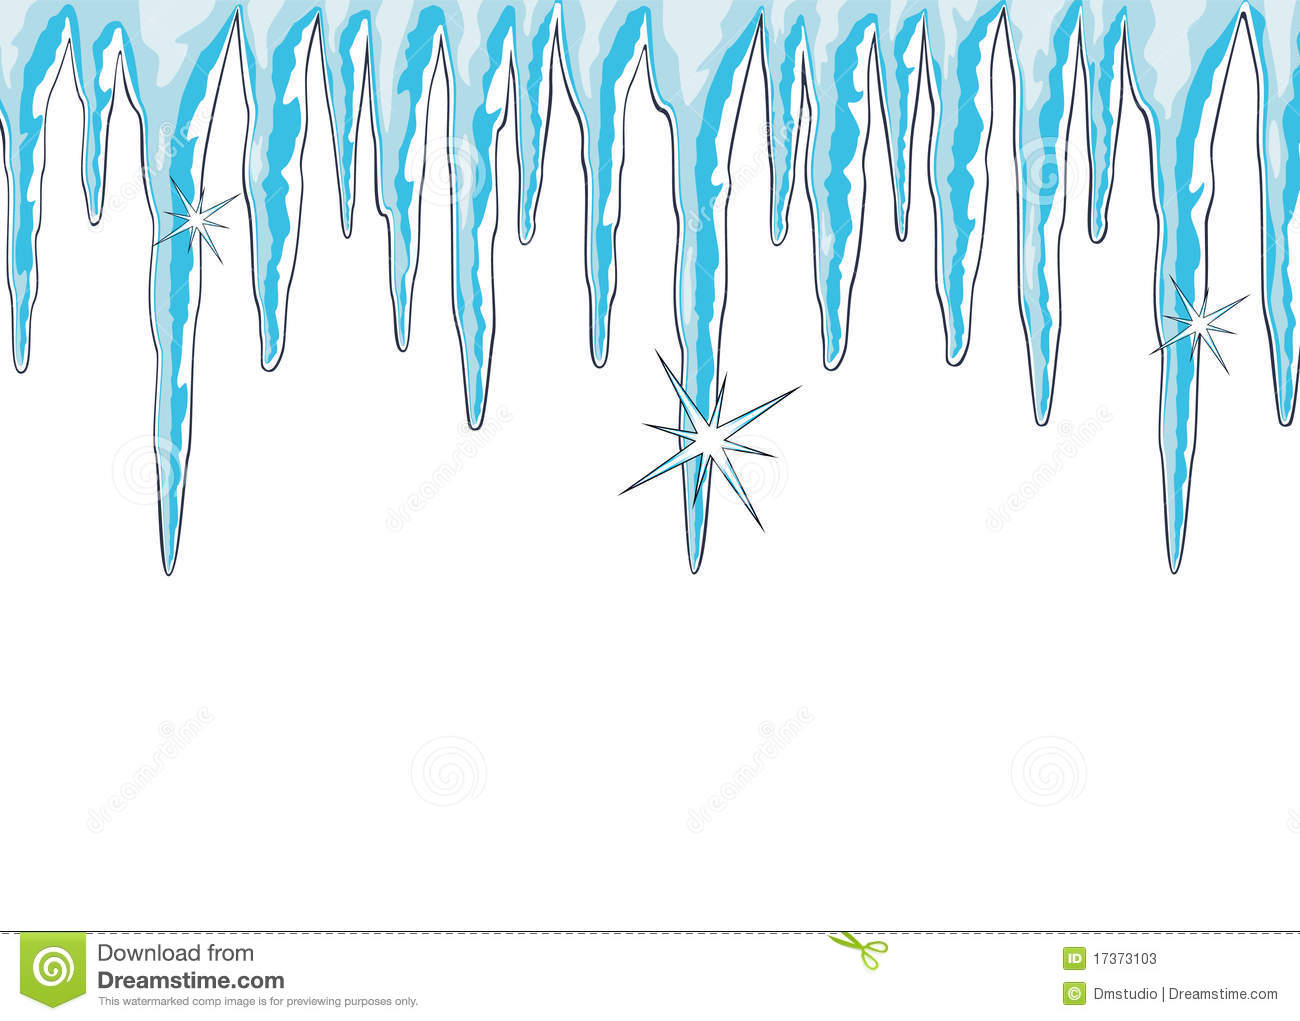 Displaying 20 Images For Icic - Icicle Clipart